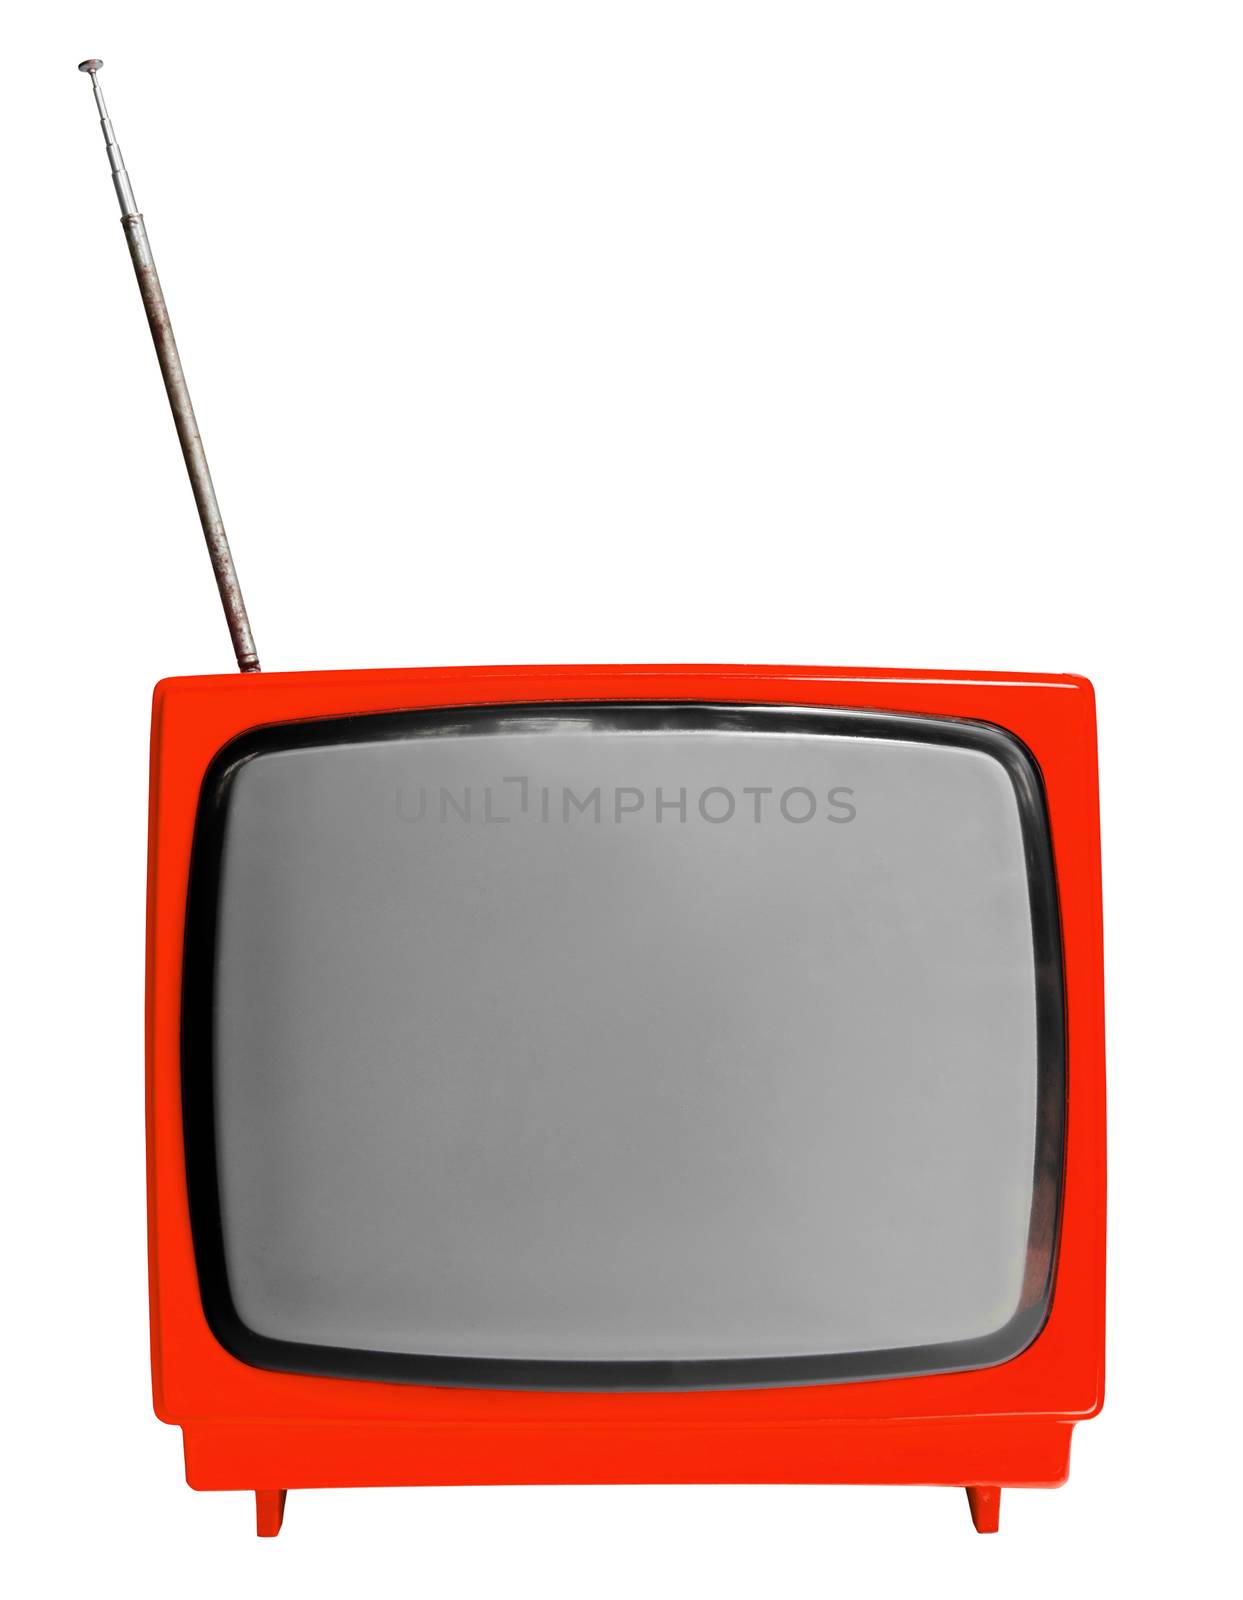 Red light vintage analog television isolated over white background, clipping path.